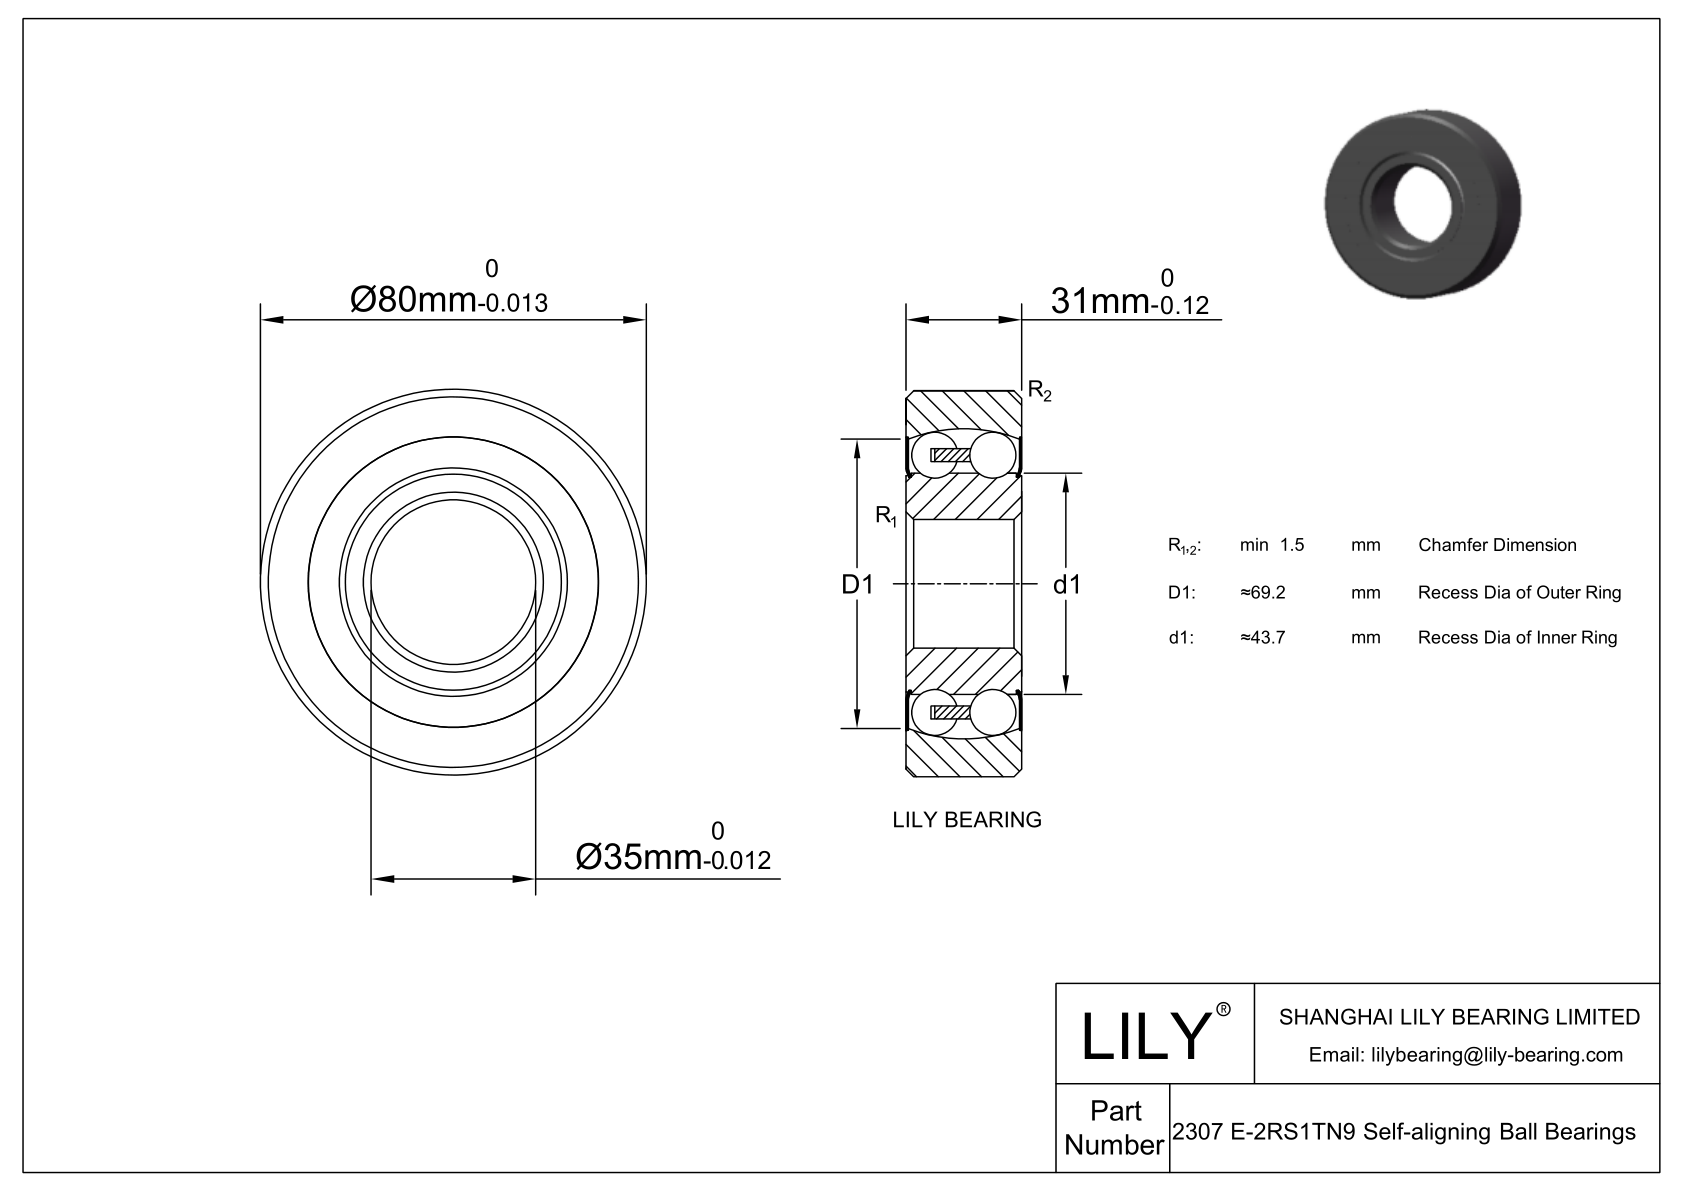 S2307 E-2RS1TN9 Stainless Steel Self Aligning Ball Bearings cad drawing